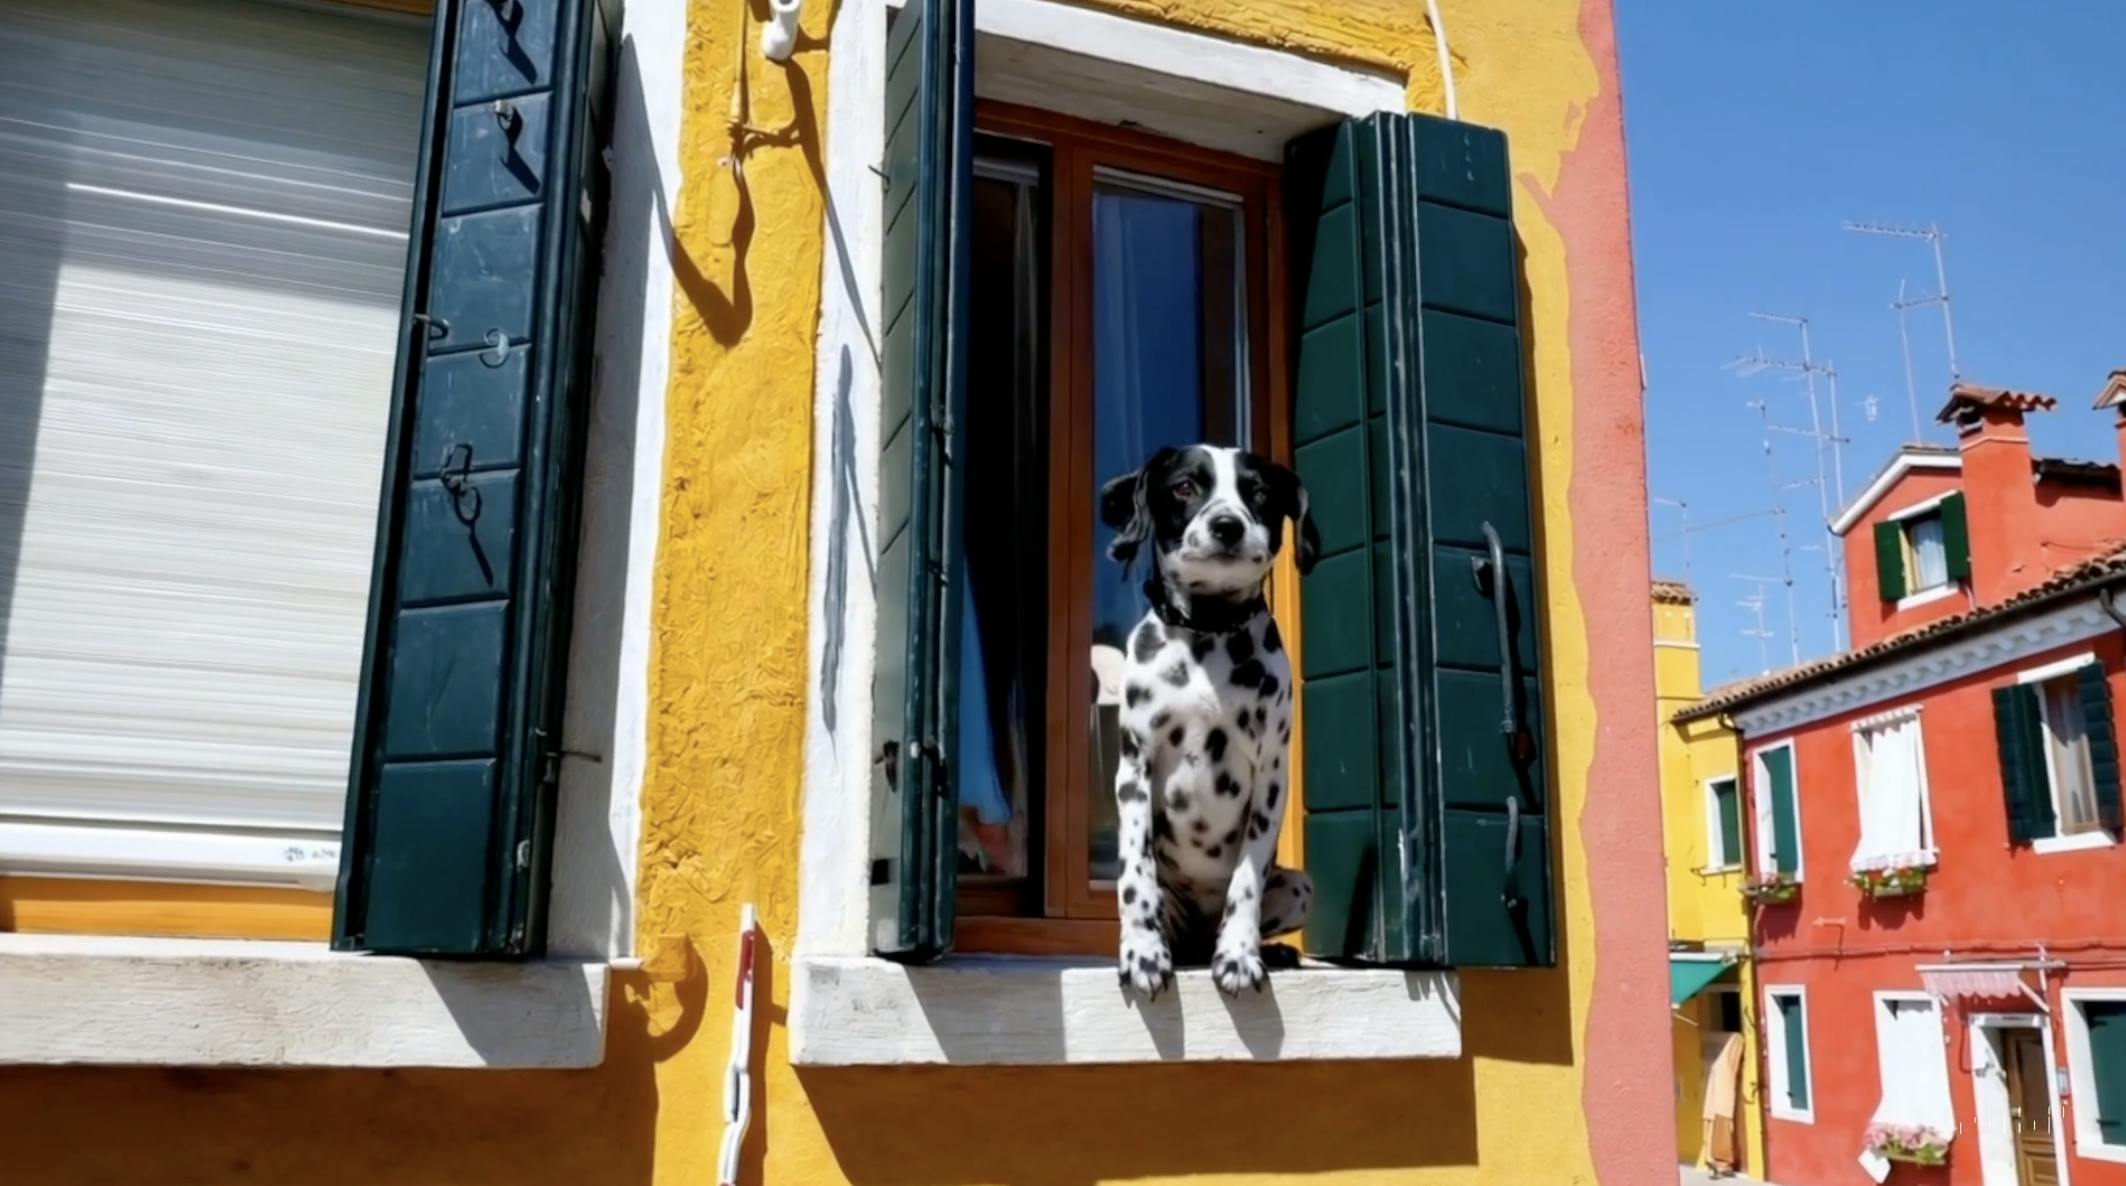 Image of a dalmatian looking out a window.